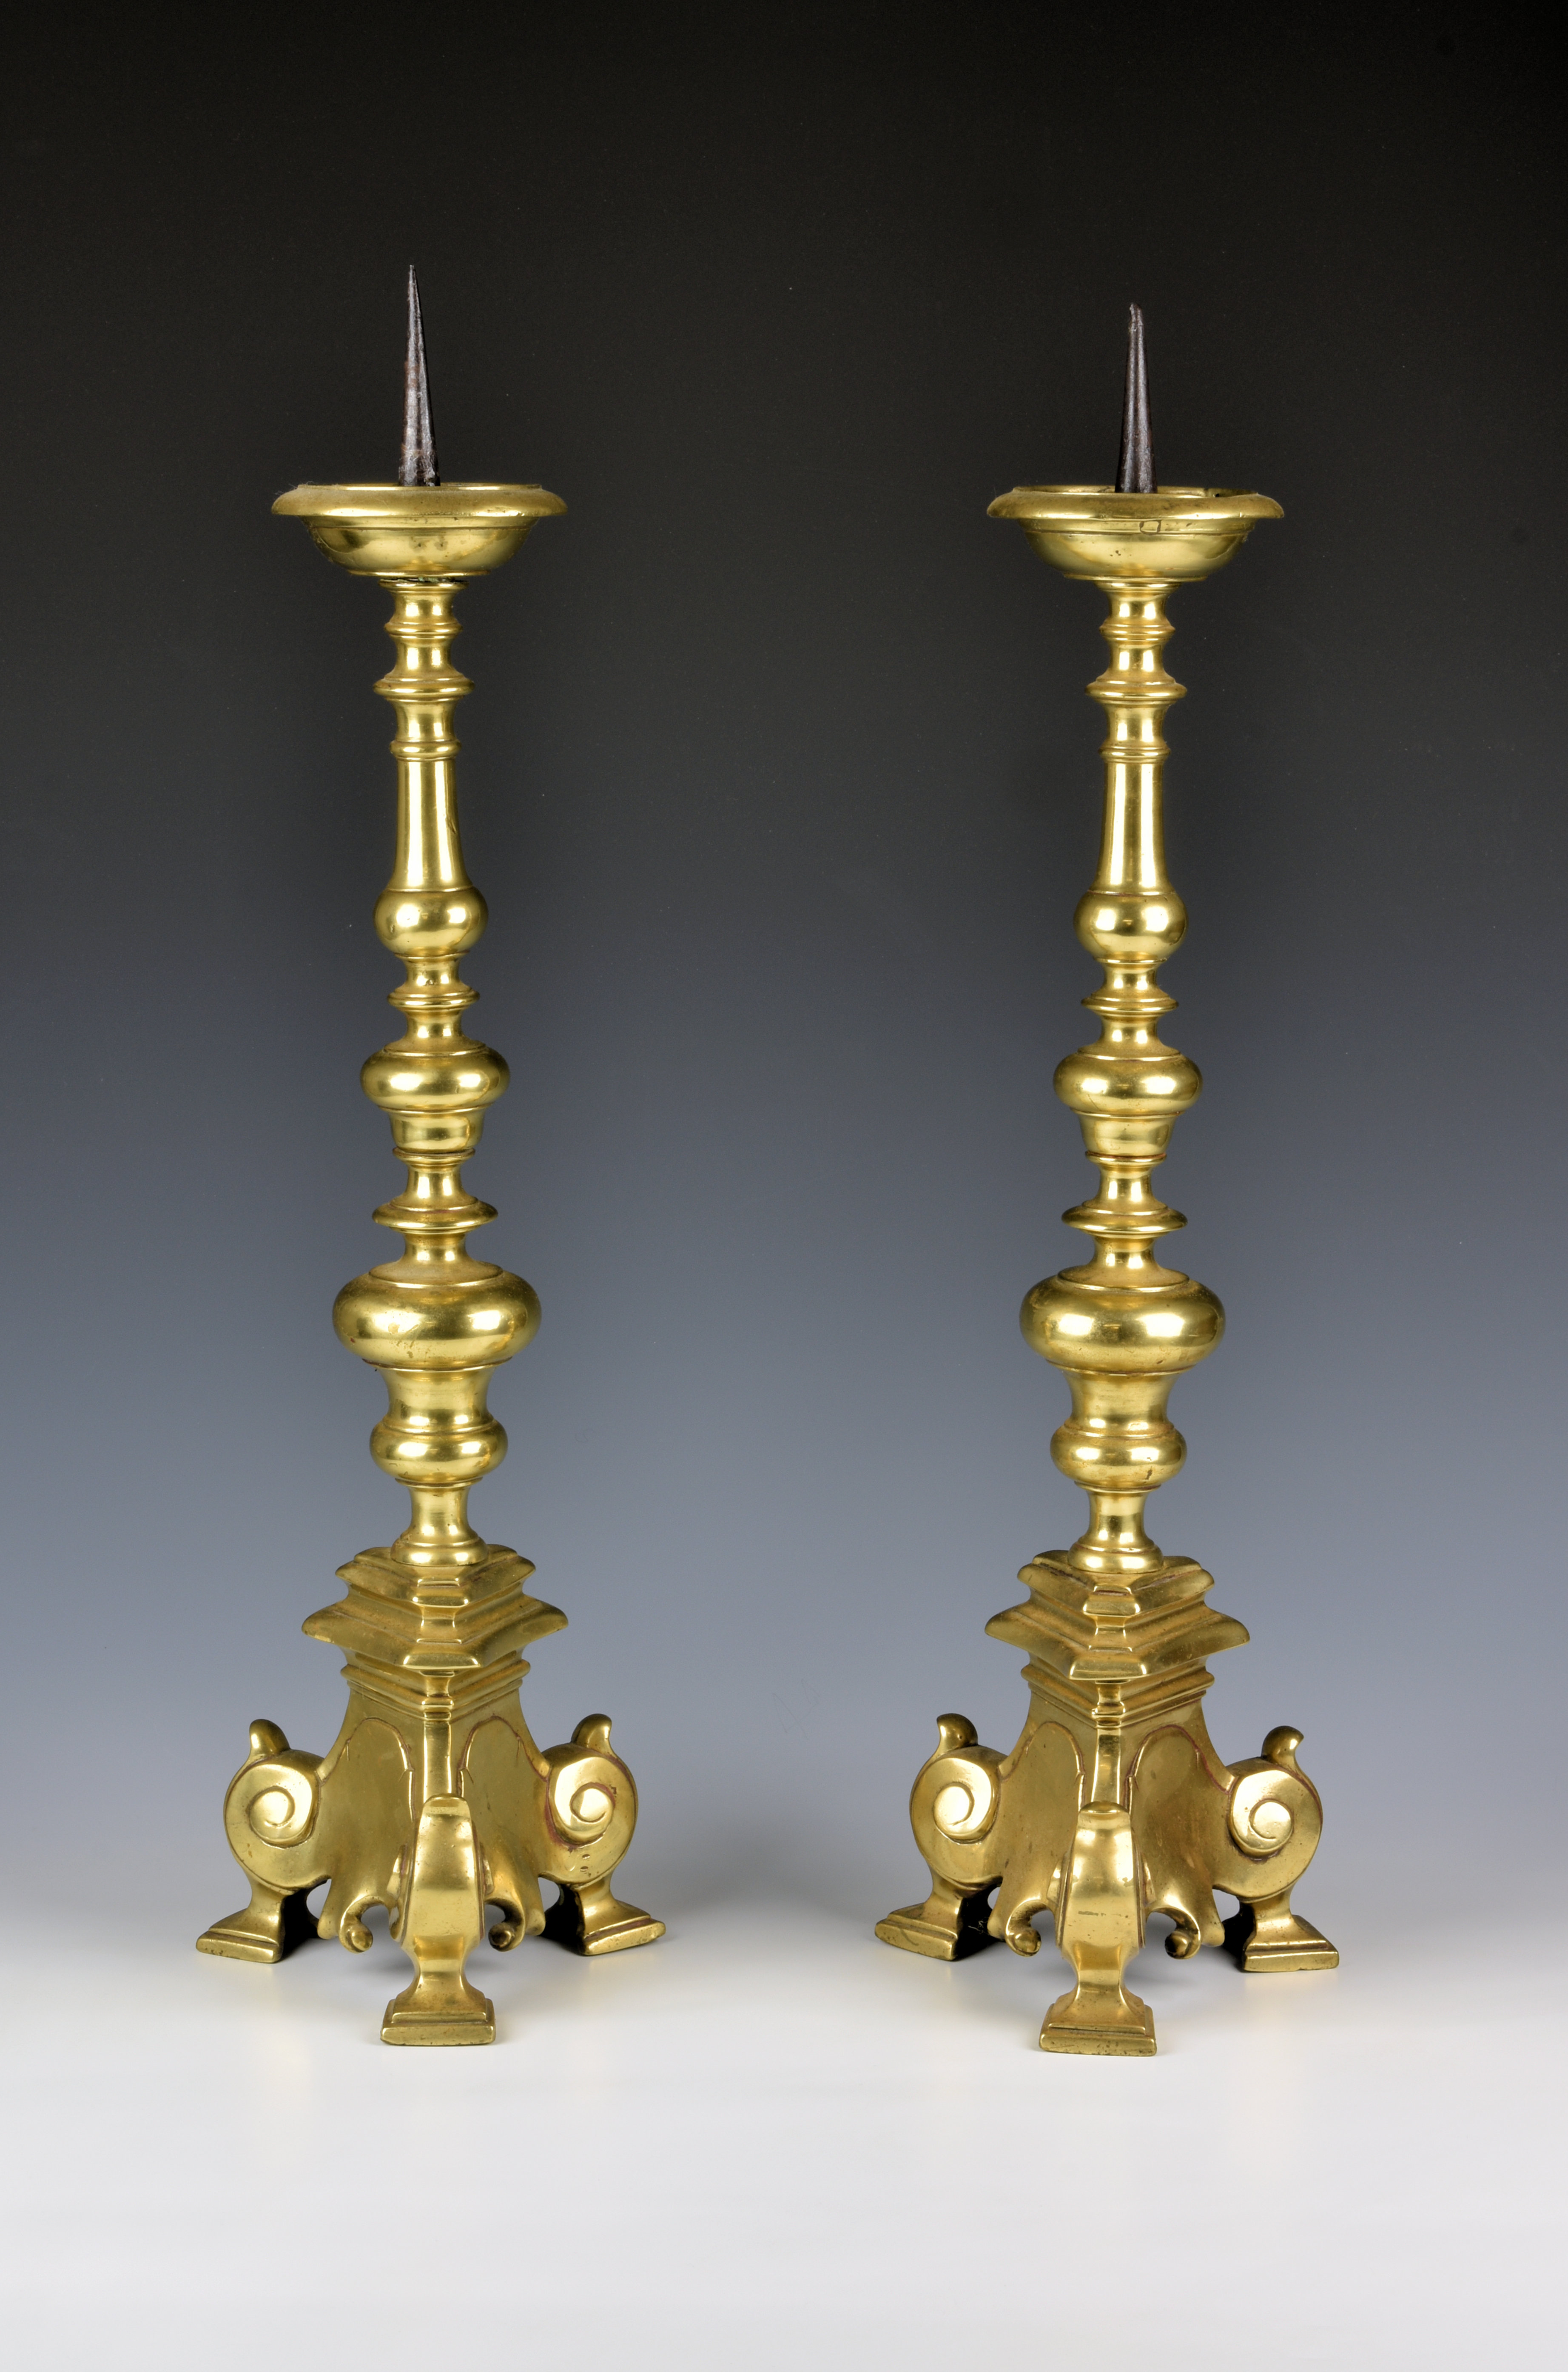 A pair of 17th / 18th century Flemish brass pricket candlesticks each with a circular drip pan